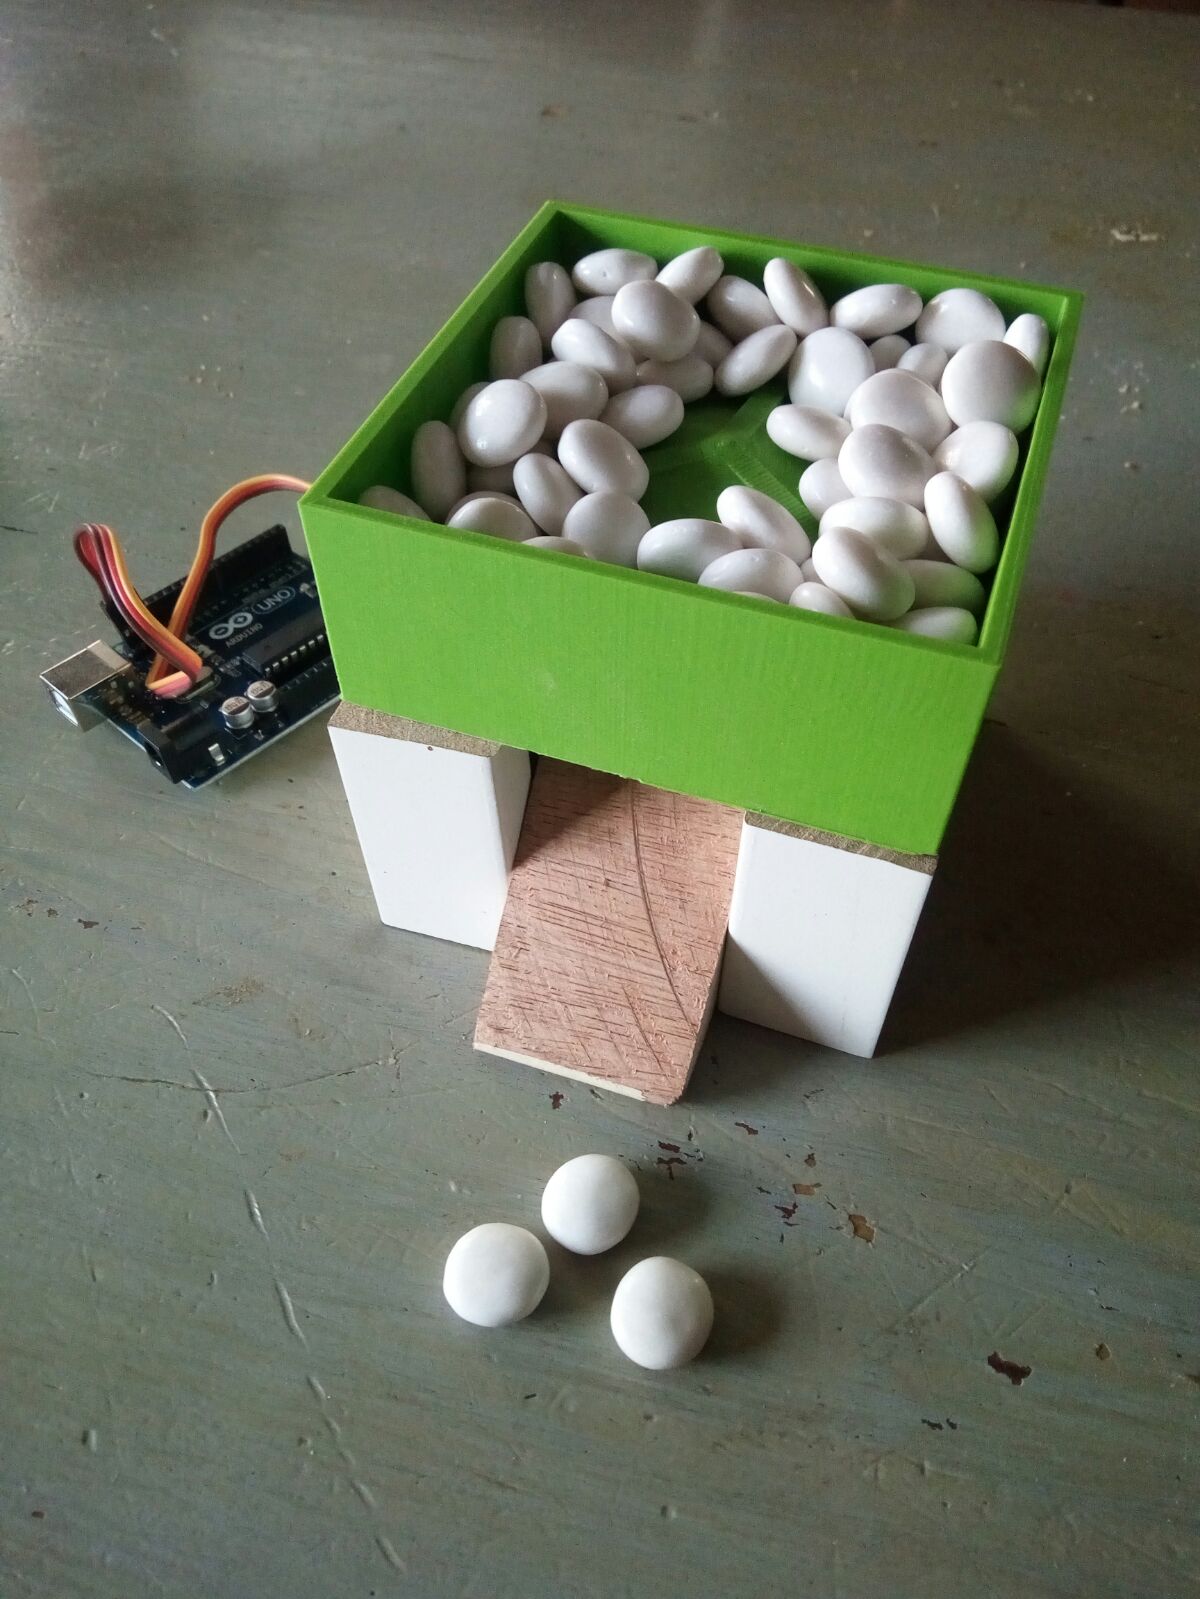 Prototype of the module filled with 'pills'